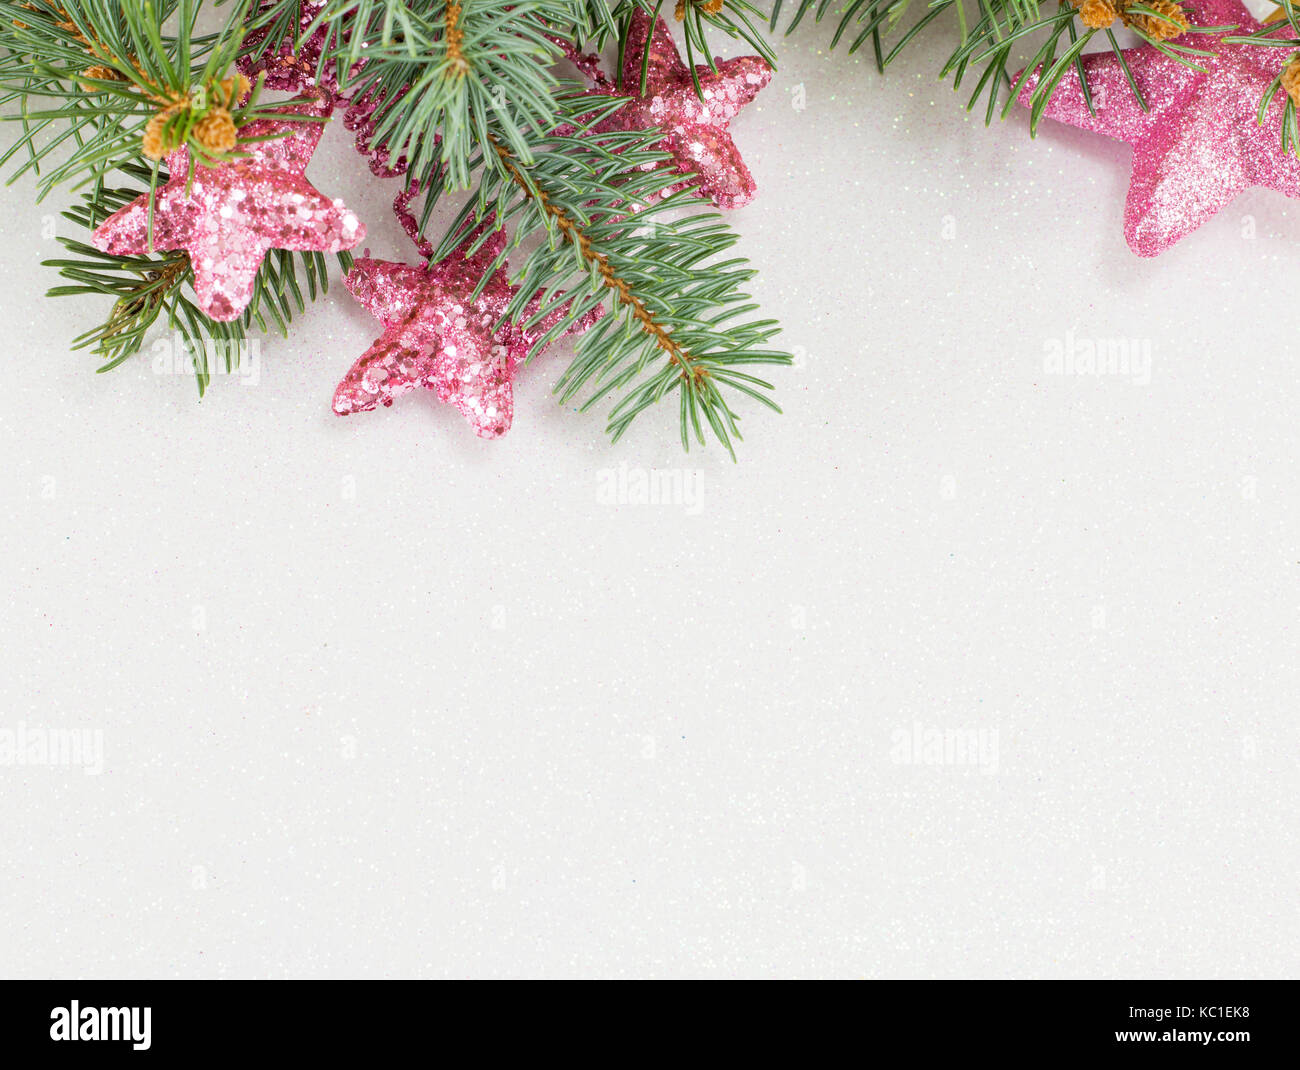 Pink star shaped ornaments hanging on a fir branch.Christmas celebration time. Stock Photo